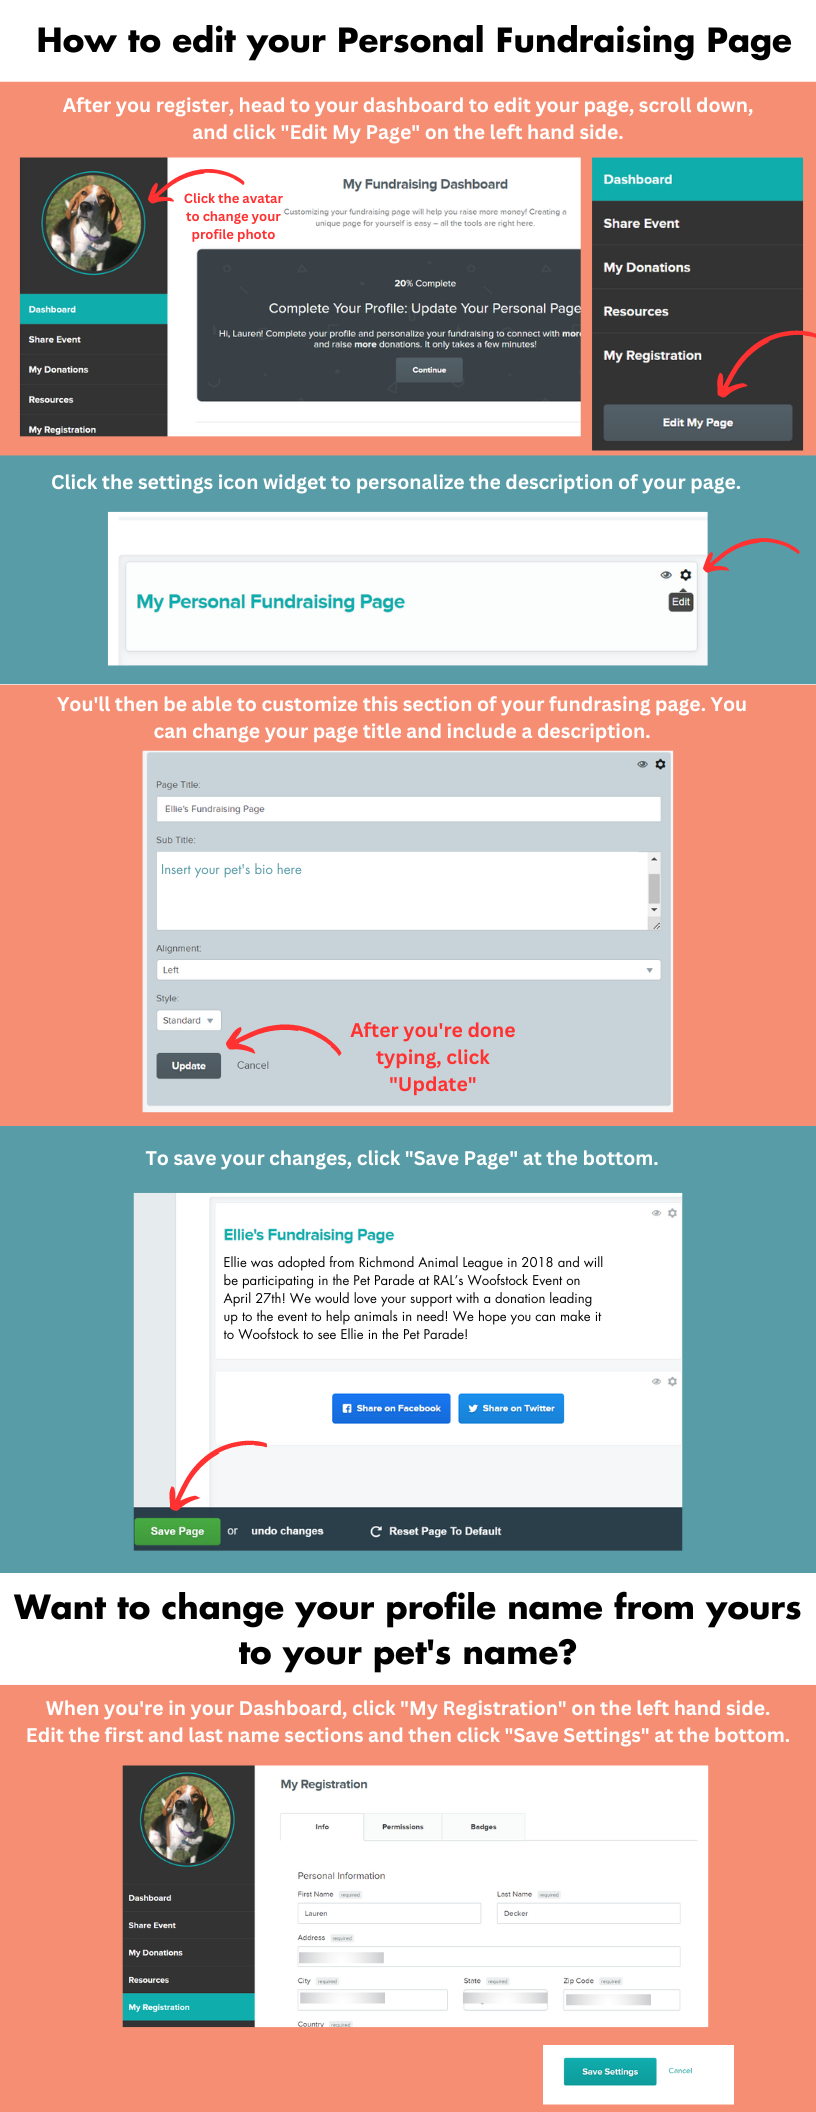 Edit Your Personal Fundraising Page (1).png